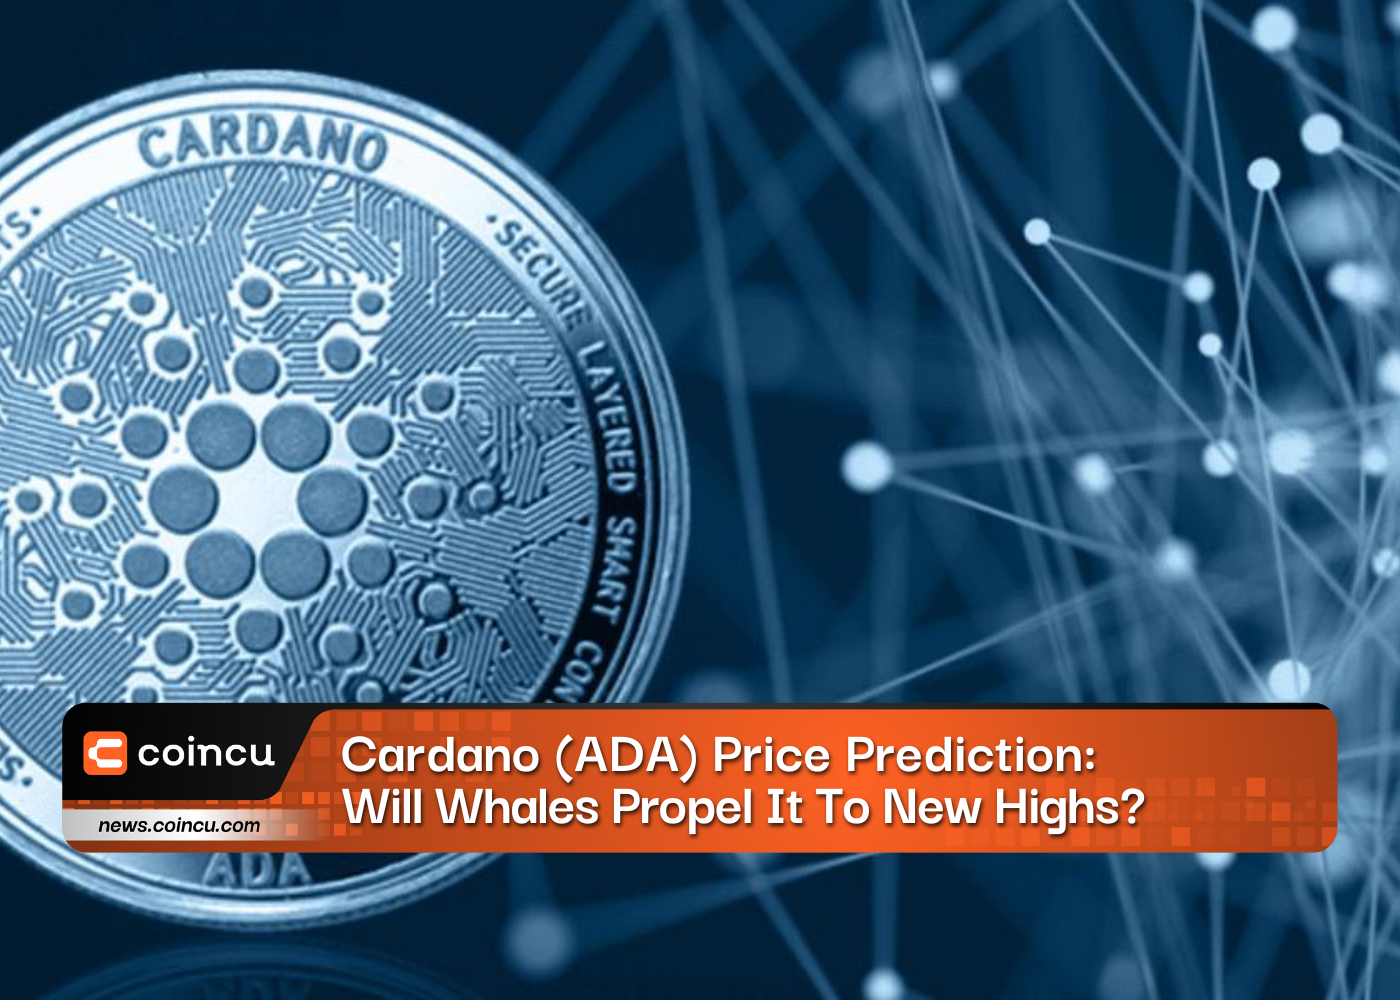 Cardano (ADA) Price Prediction: Will Whales Propel It To New Highs? - CoinCu News